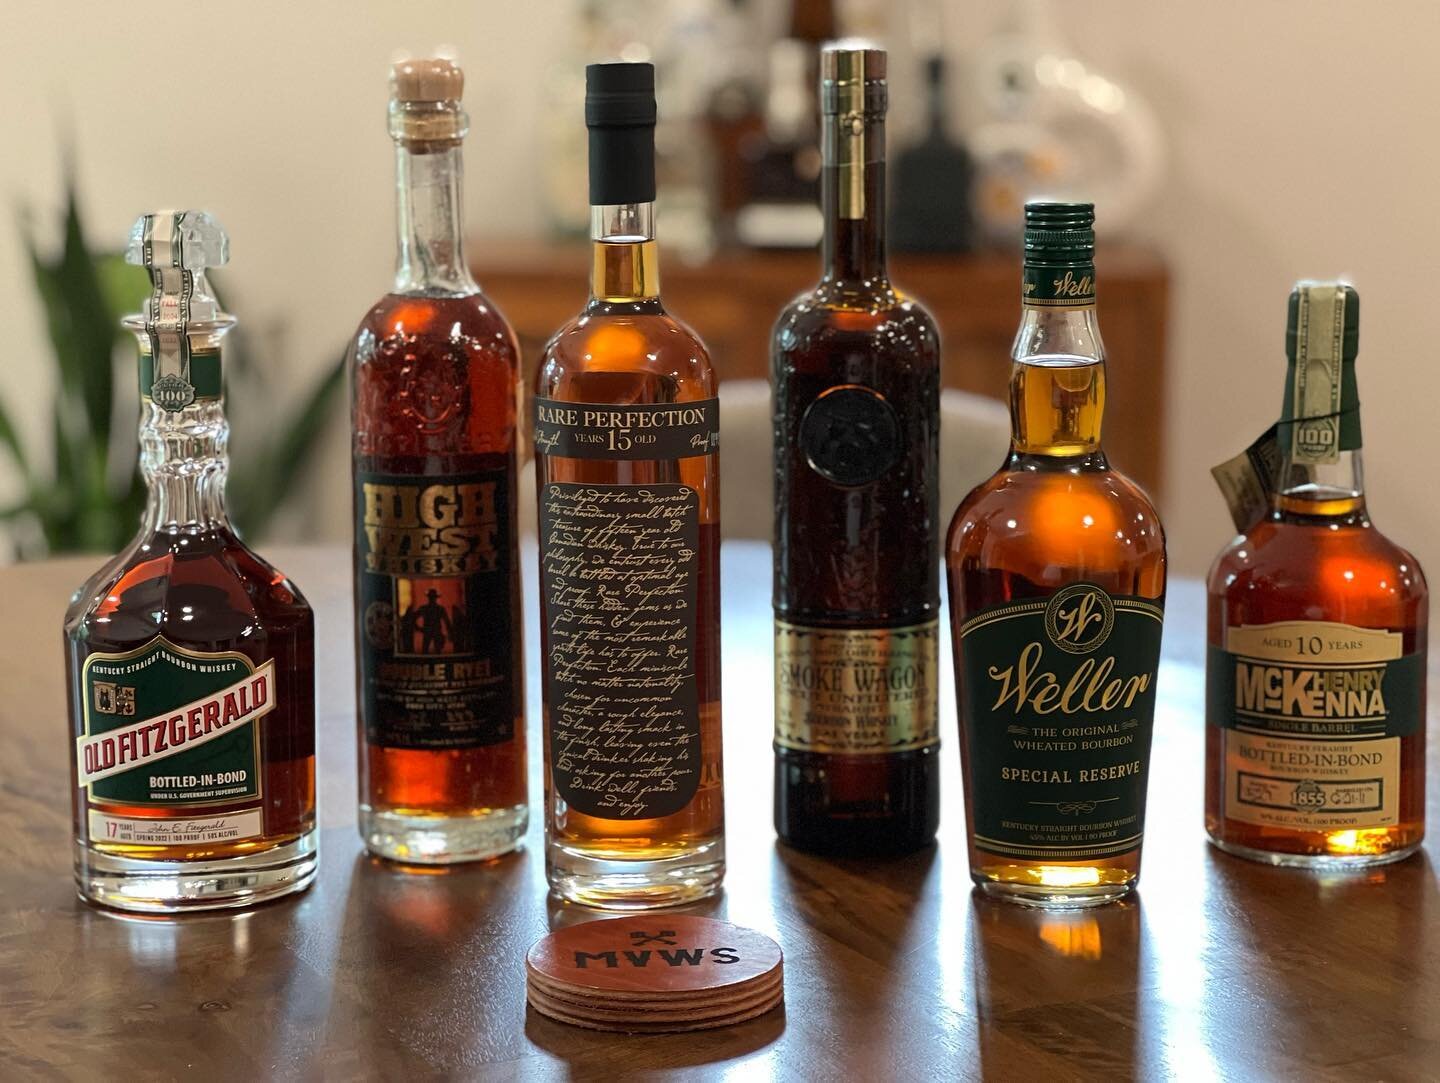 Added a couple new bottles to the collection today&hellip; Looking forward to sharing these soon! 

Excited about all of these!

#mountvernonwhiskeysociety #oldfitzgeraldbourbon #highwestdistillery #rareperfectionwhiskey #smokewagonuncutunfiltered #w